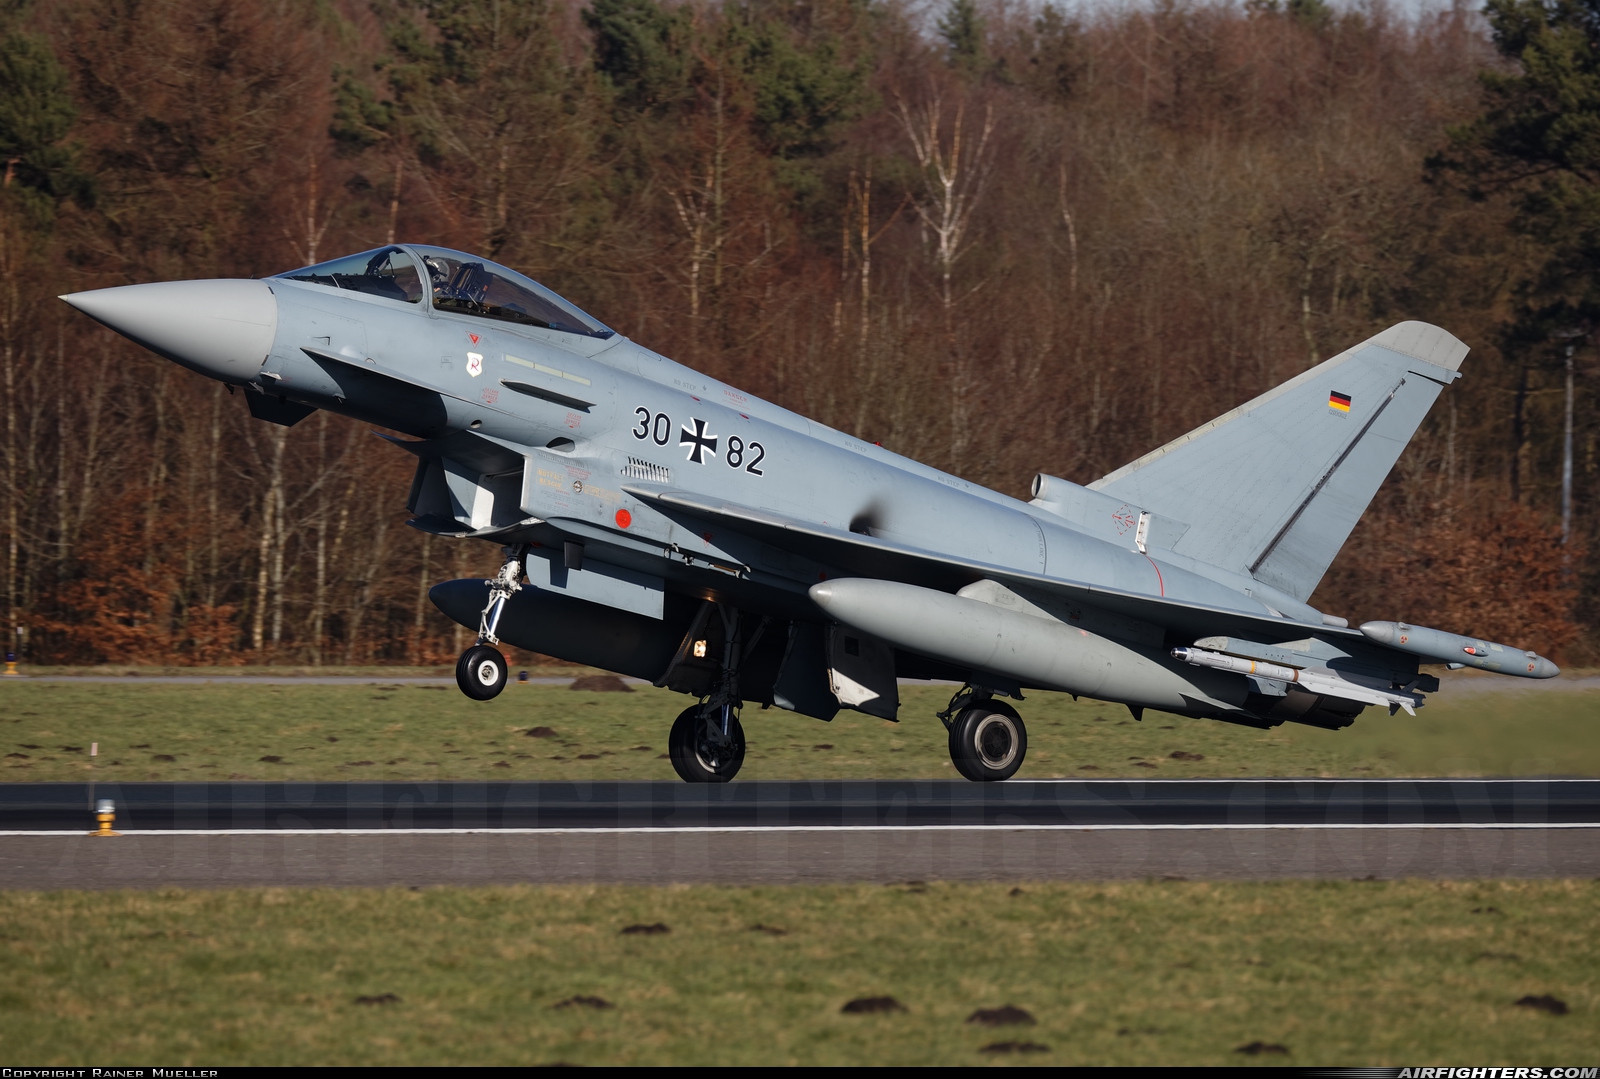 Germany - Air Force Eurofighter EF-2000 Typhoon S 30+82 at Wittmundhafen (Wittmund) (ETNT), Germany